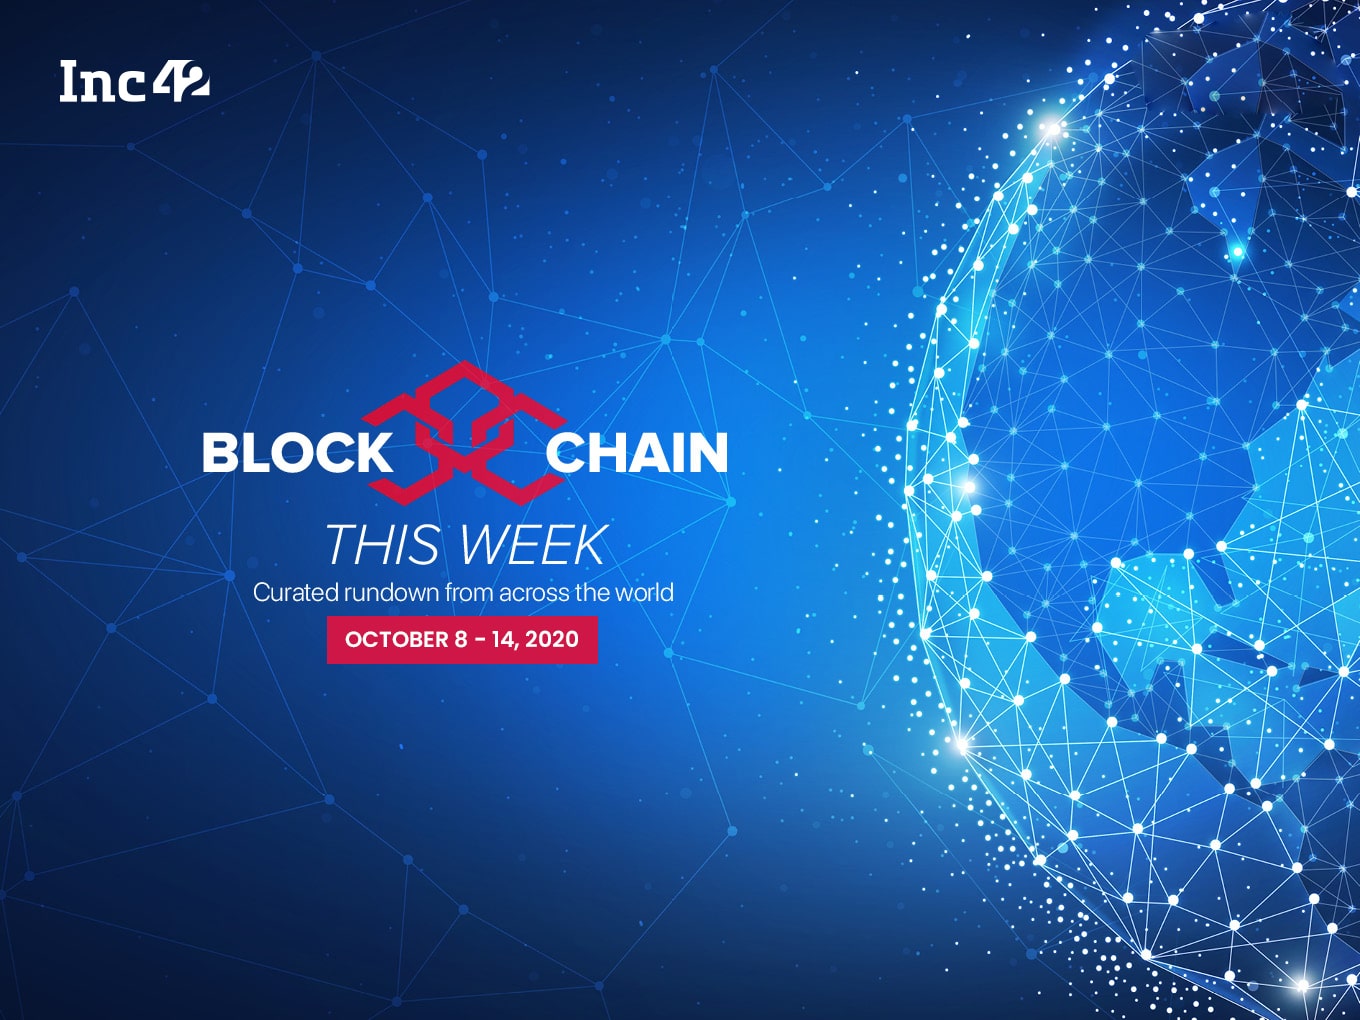 Blockchain This Week: PwC’s ‘Time For Trust’ Report 2020 On India Driving Blockchain Adoption & More